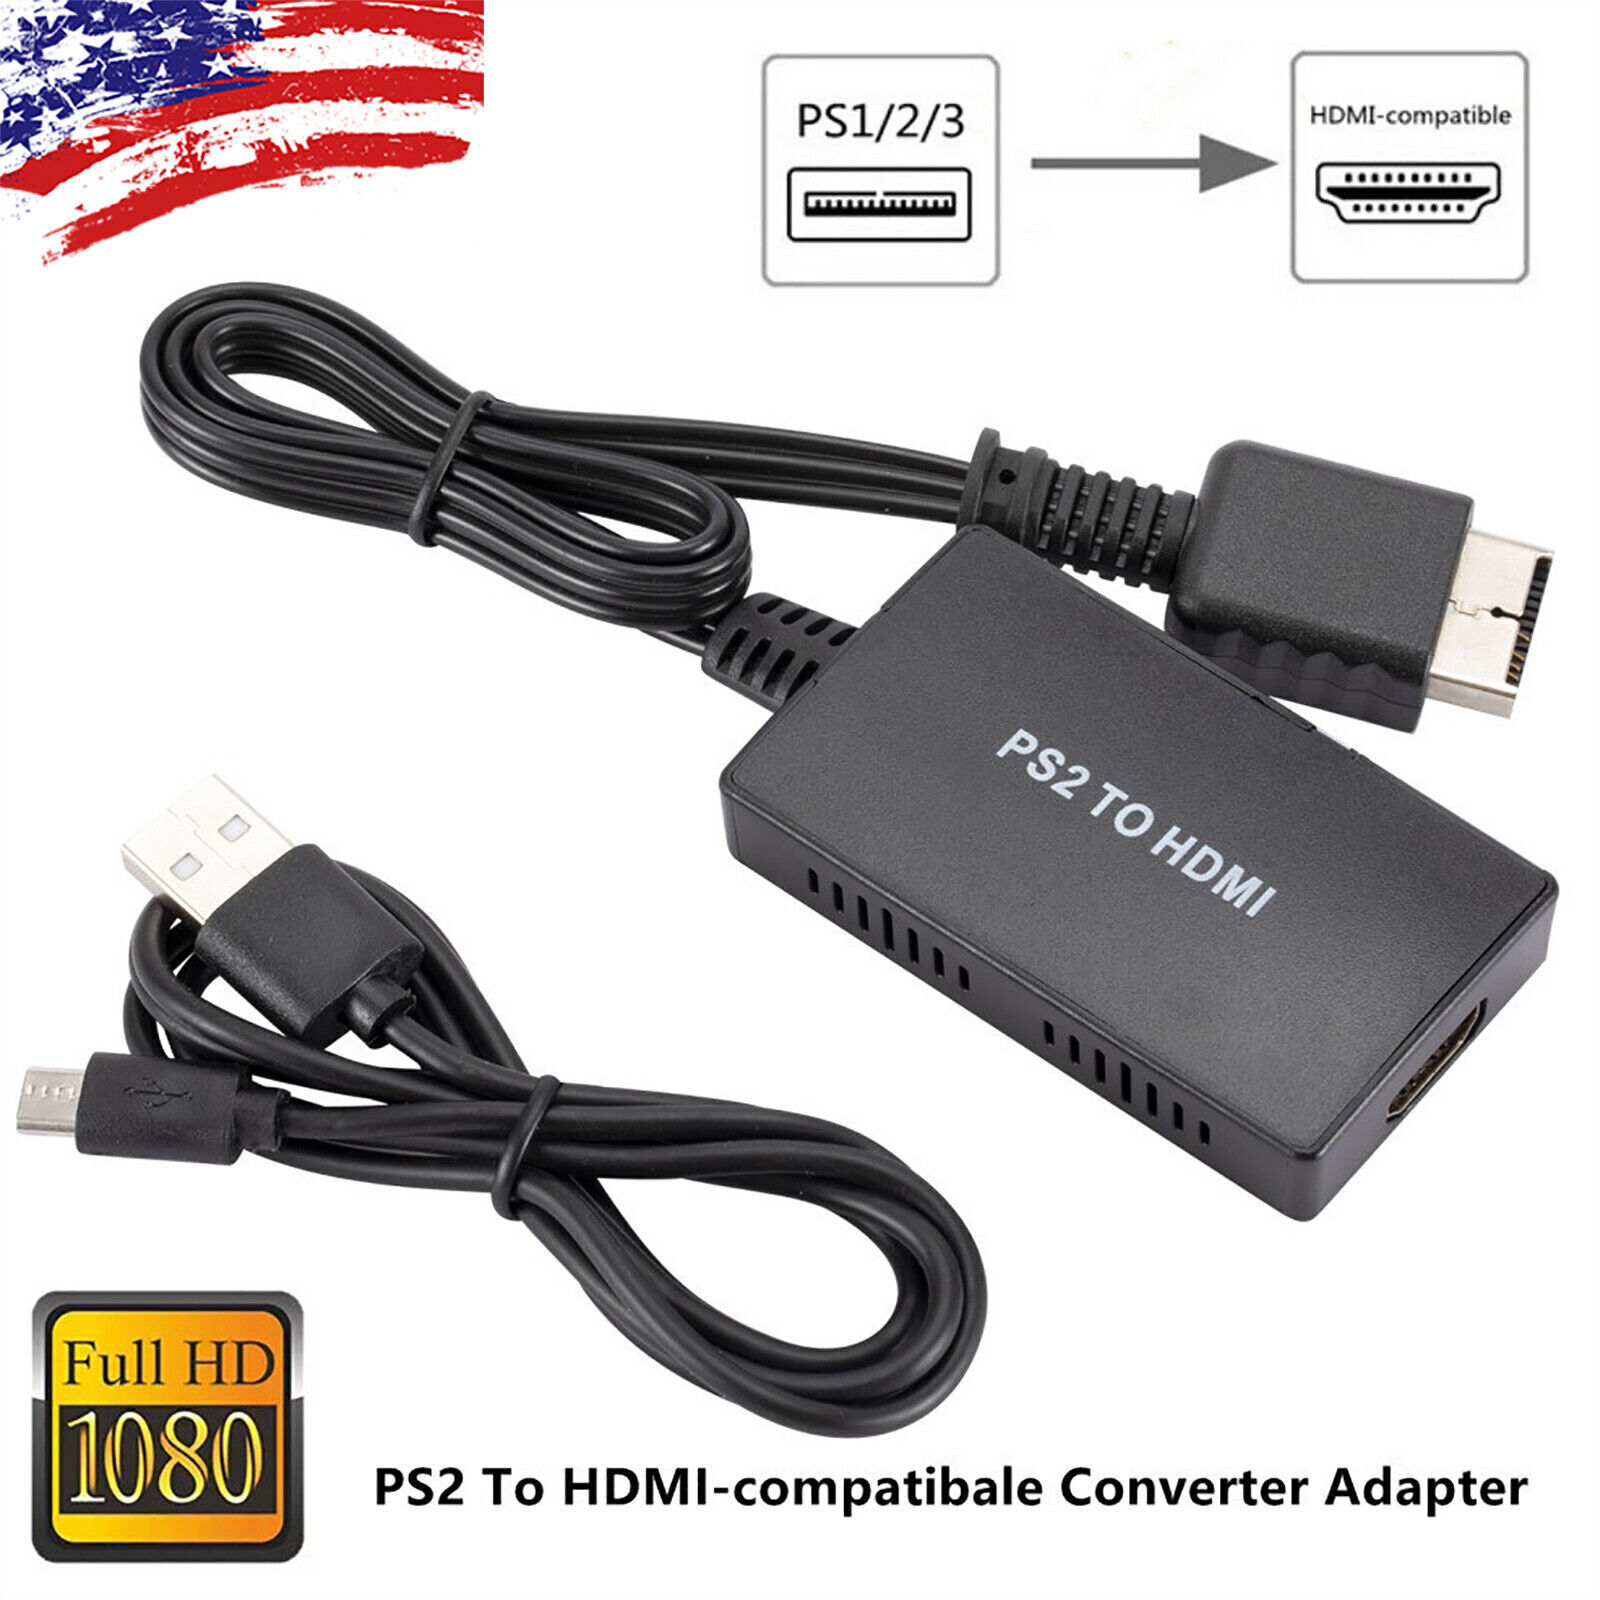 PS2 to HDMI Converter Video Adapter For PlayStation 1/2/3 1080P HDTV Monitor